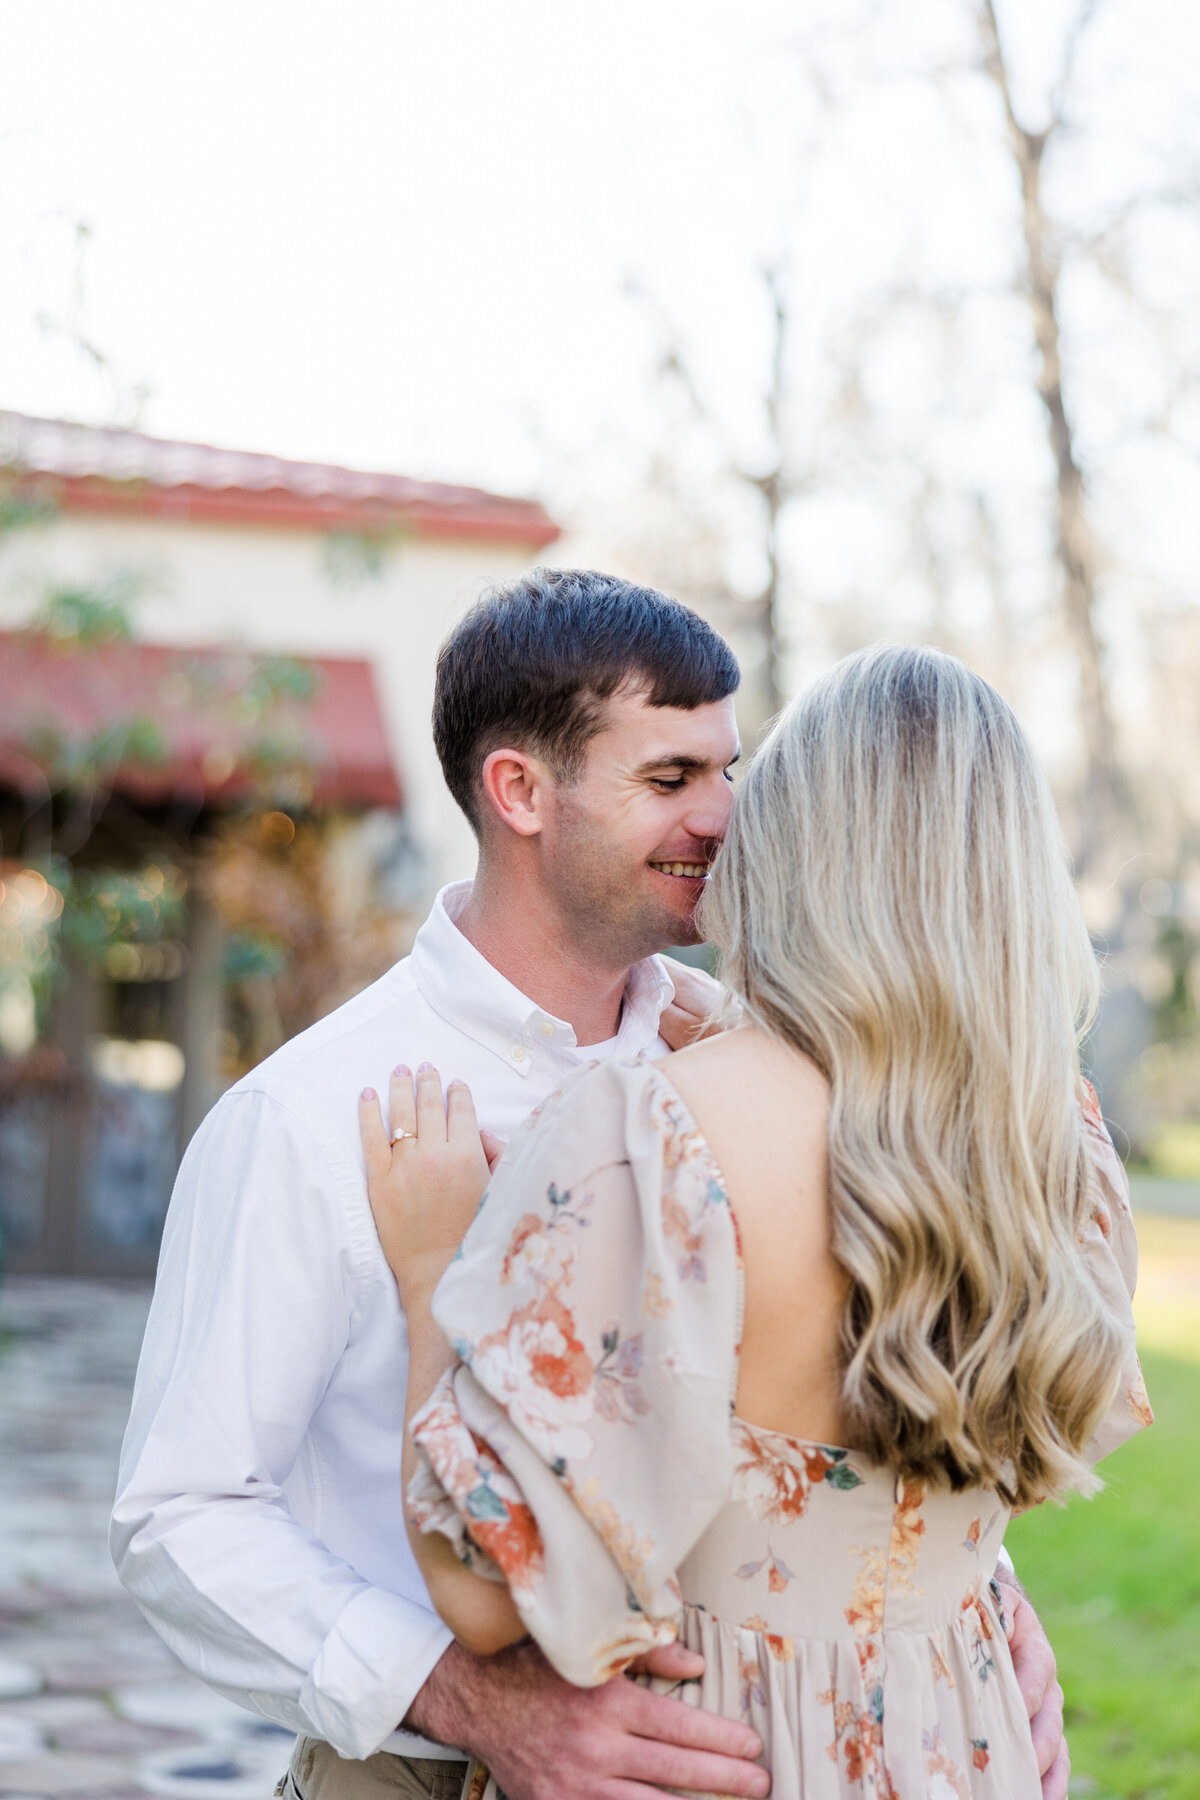 Mary Warren Engagement Session - Taylor'd Southern Events - Florida Wedding Photographer-0321